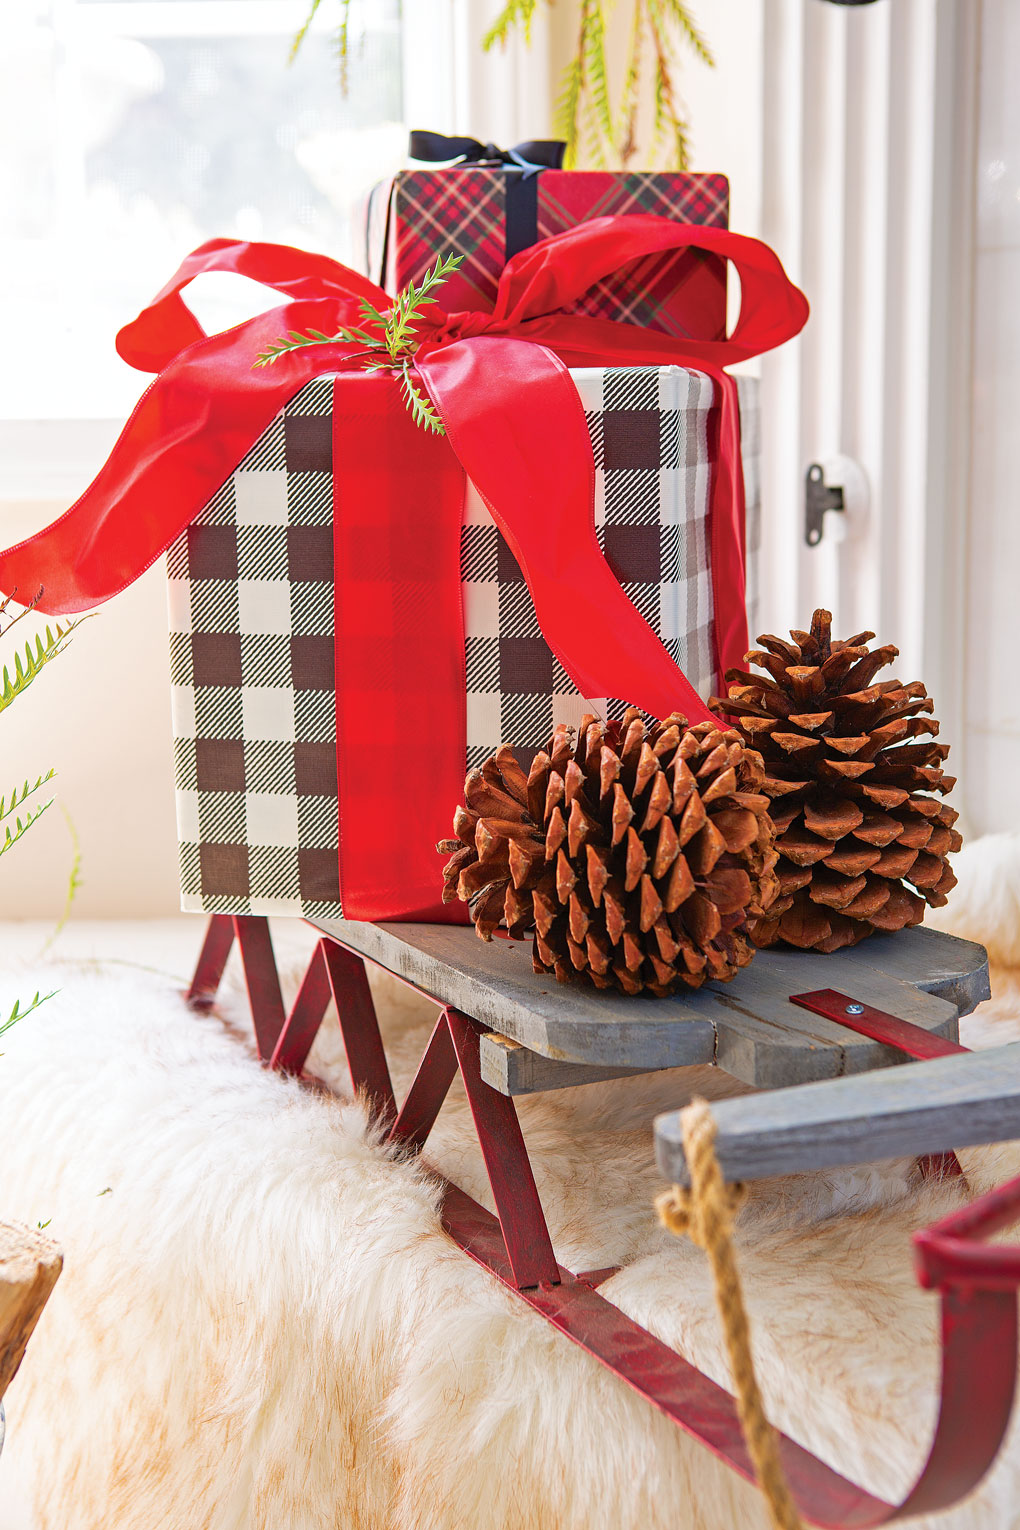 Pinecones and a black and white gingham wrapped present with a red bow sit on an indoor decorative sled for a rustic Christmas look.